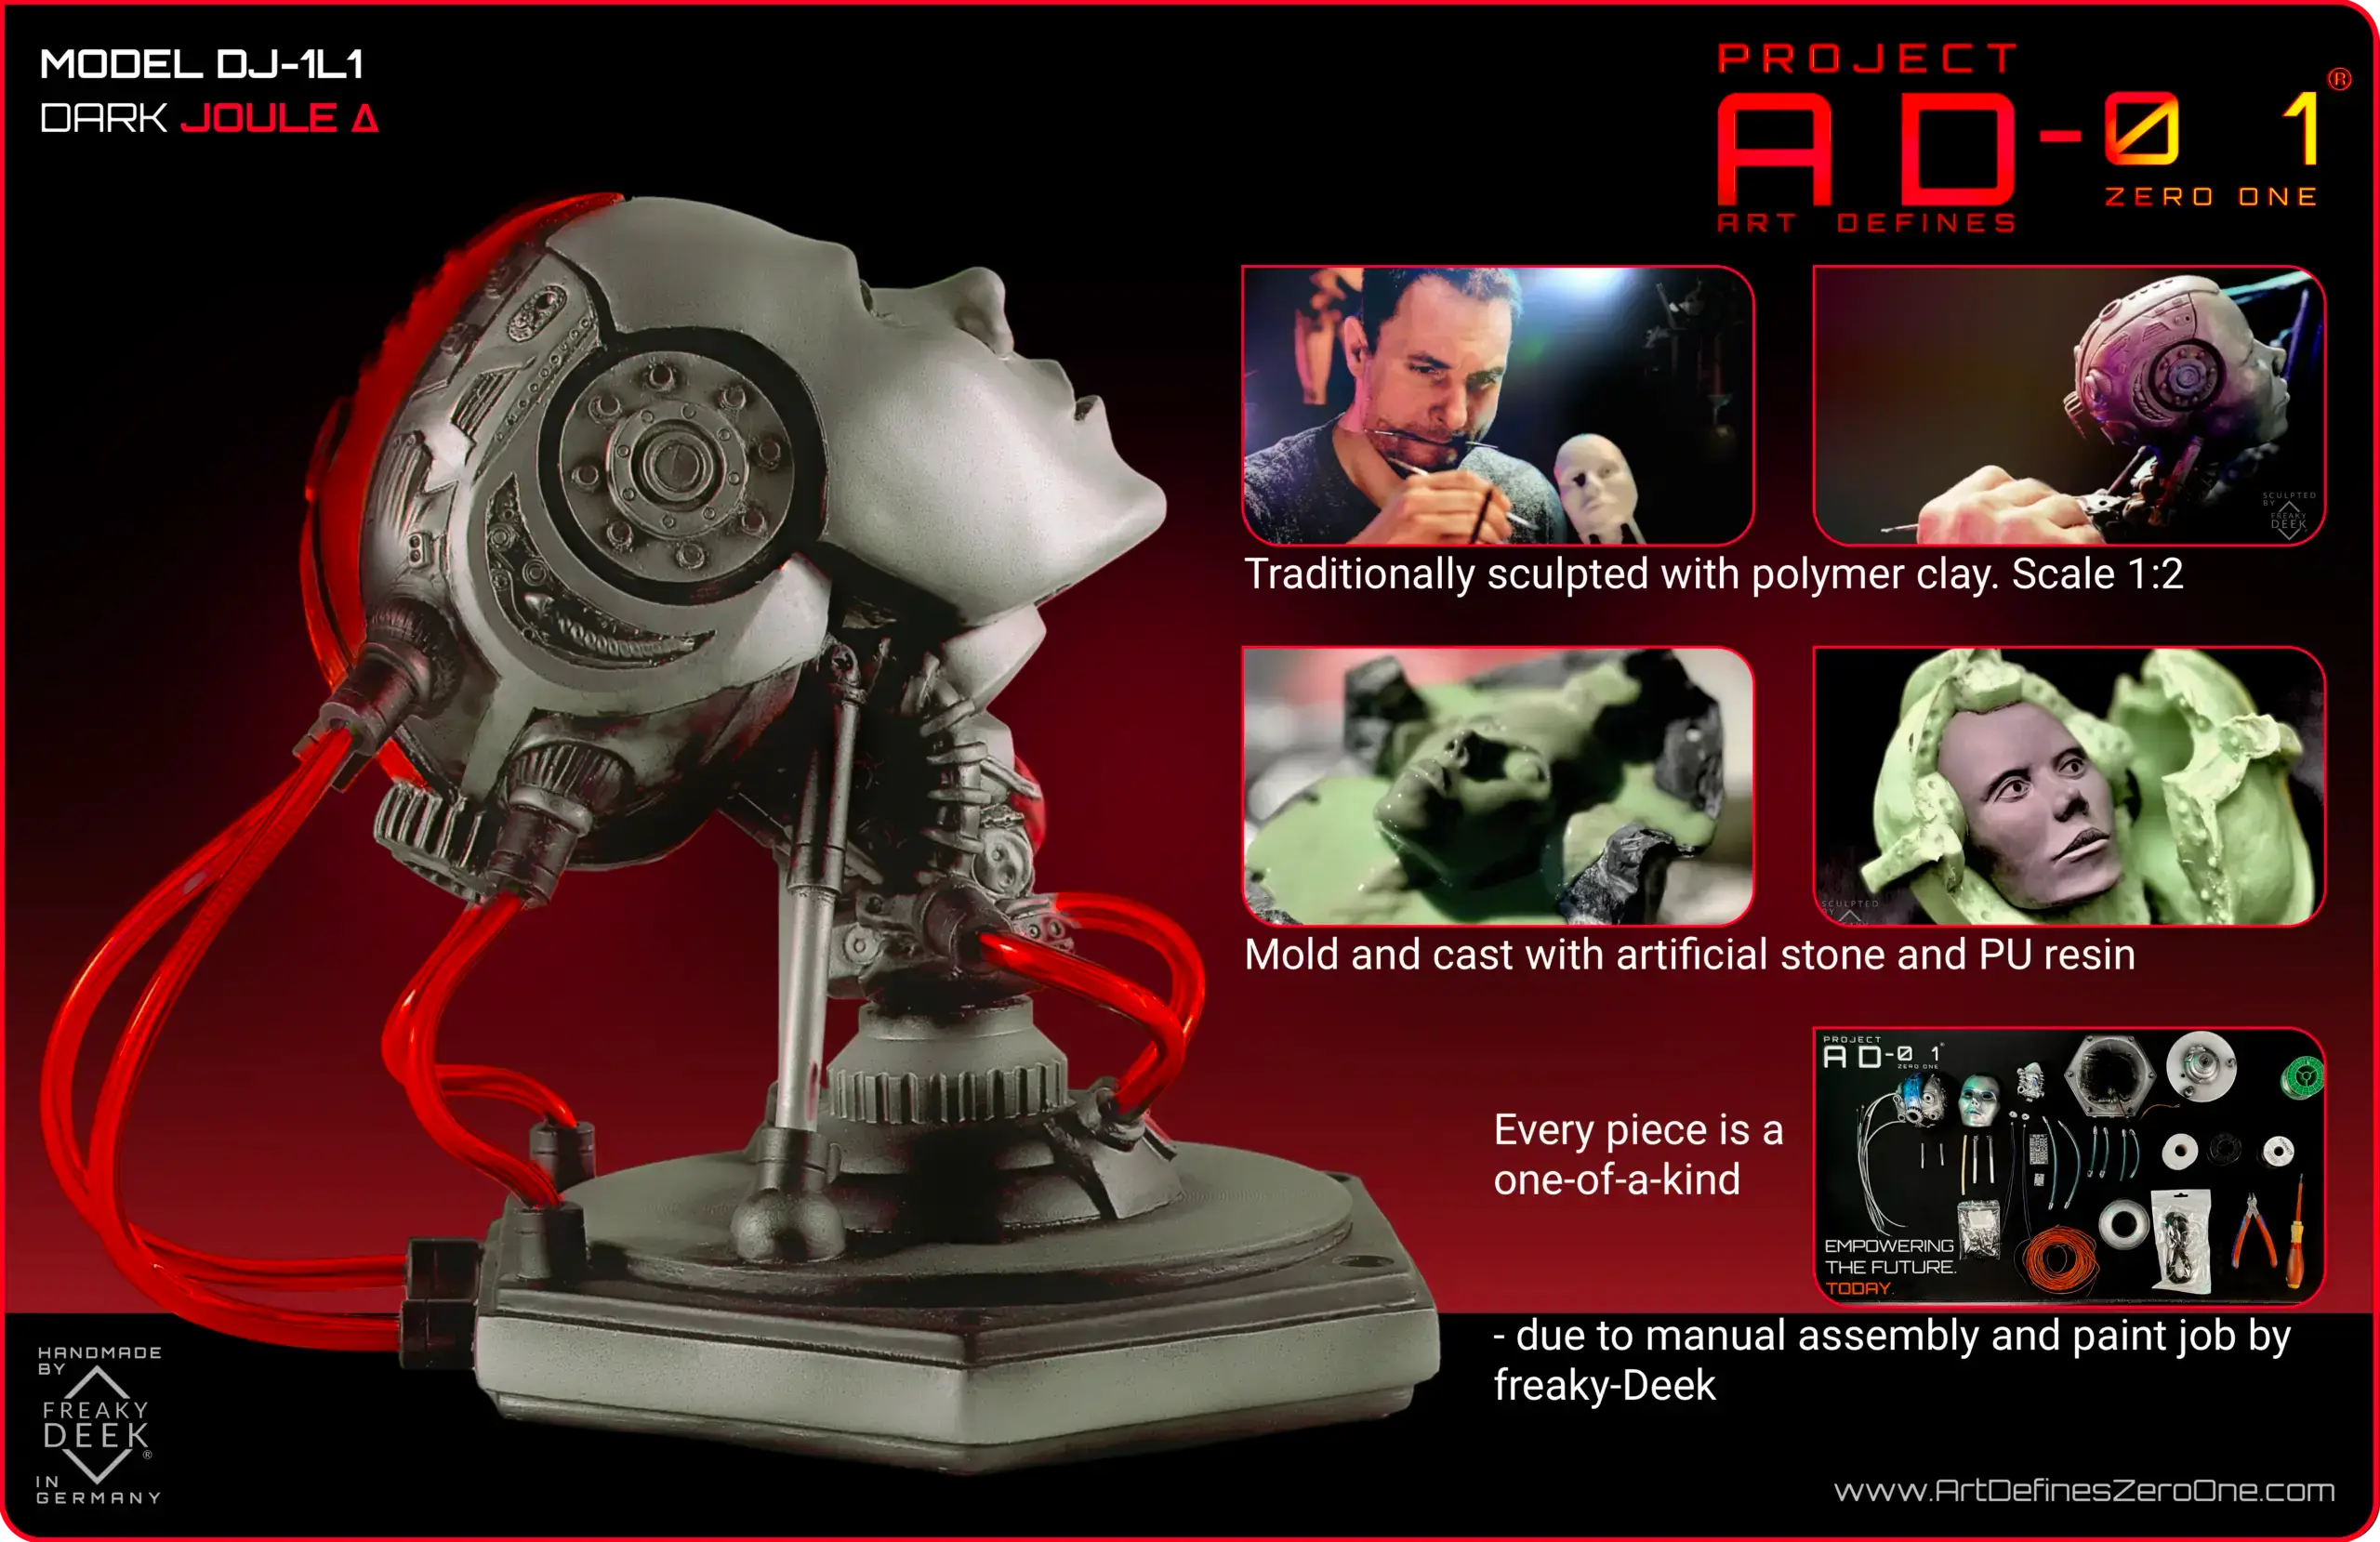 Project AD-01 DJ-1L1 handmade android sculpture dark Joule with red energy tubes, product details: traditionally sculpted with polymer clay, scale 1:2, mold and cast by hand with polystone and PU resin, handpainted and assembled by freaky-Deek